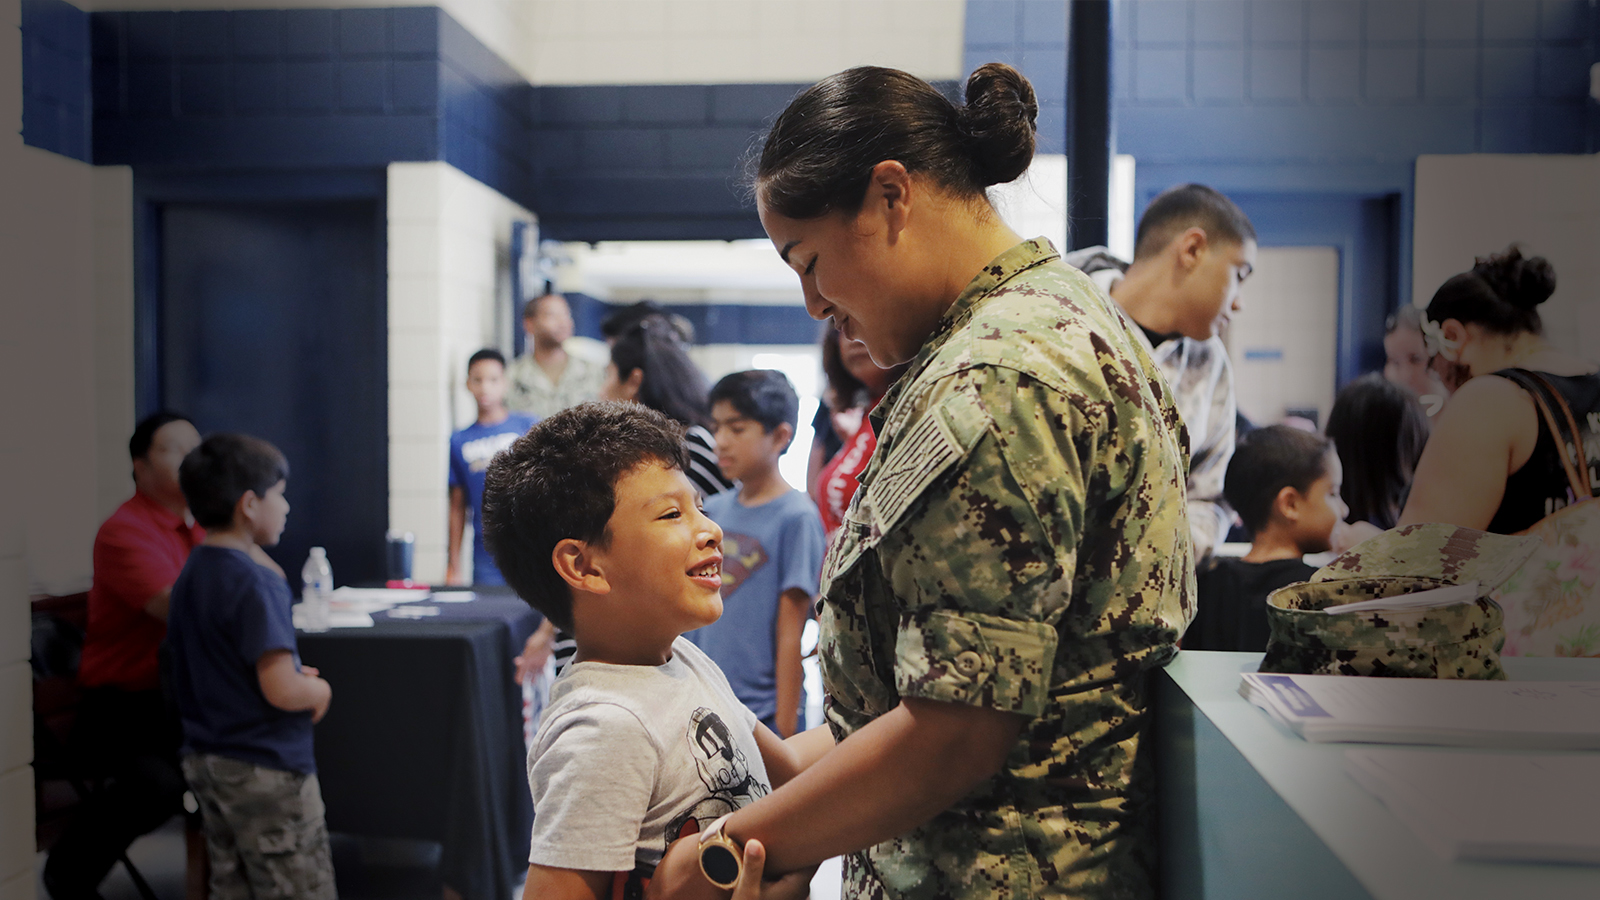 Military person holding their child at a school supply event.